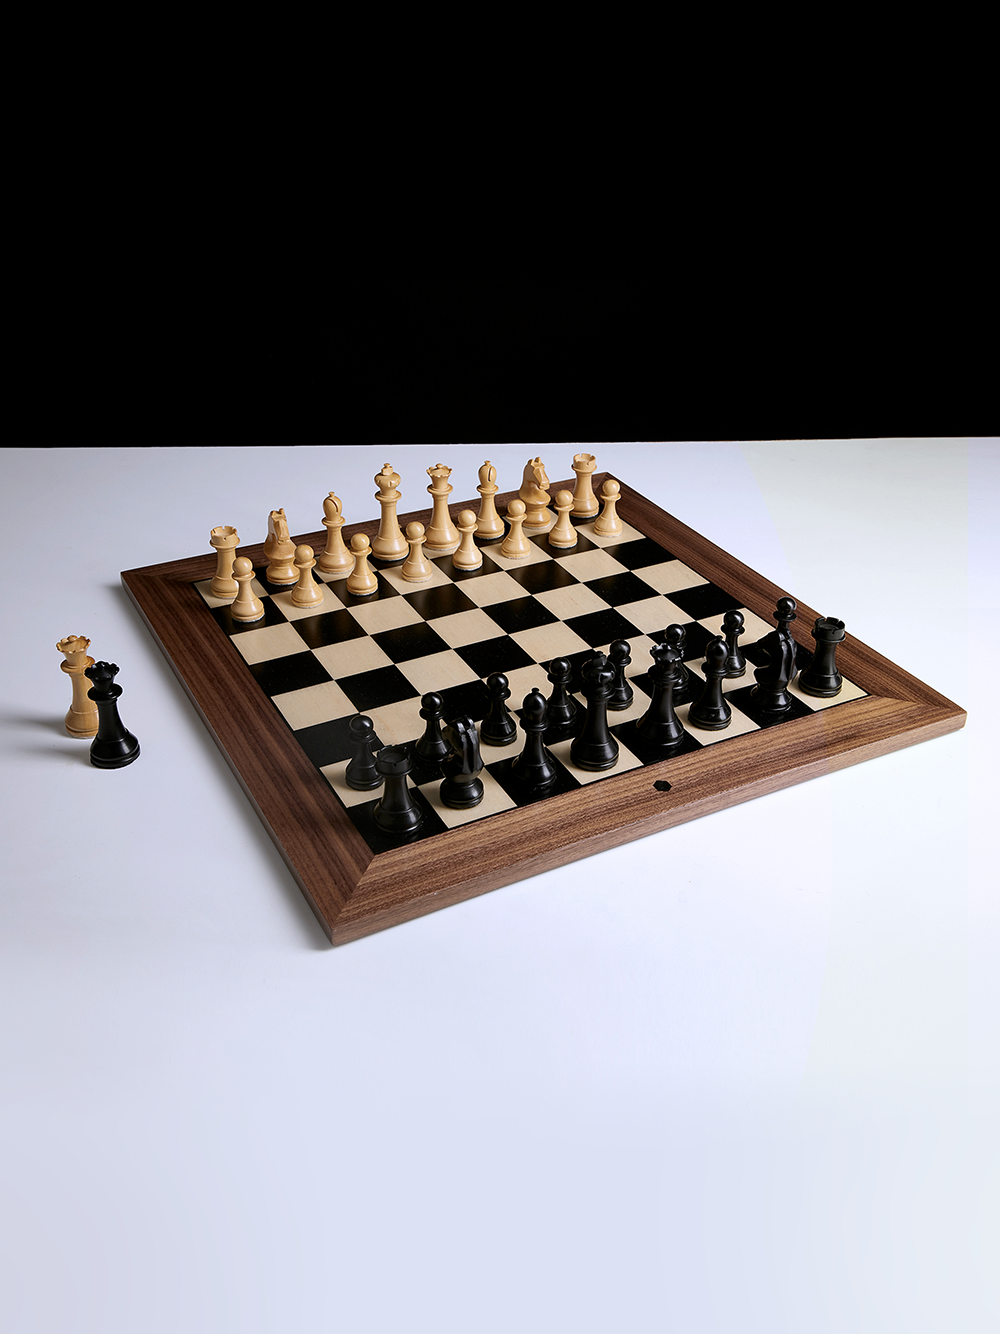 The Chess Online Shop, Economy chess sets